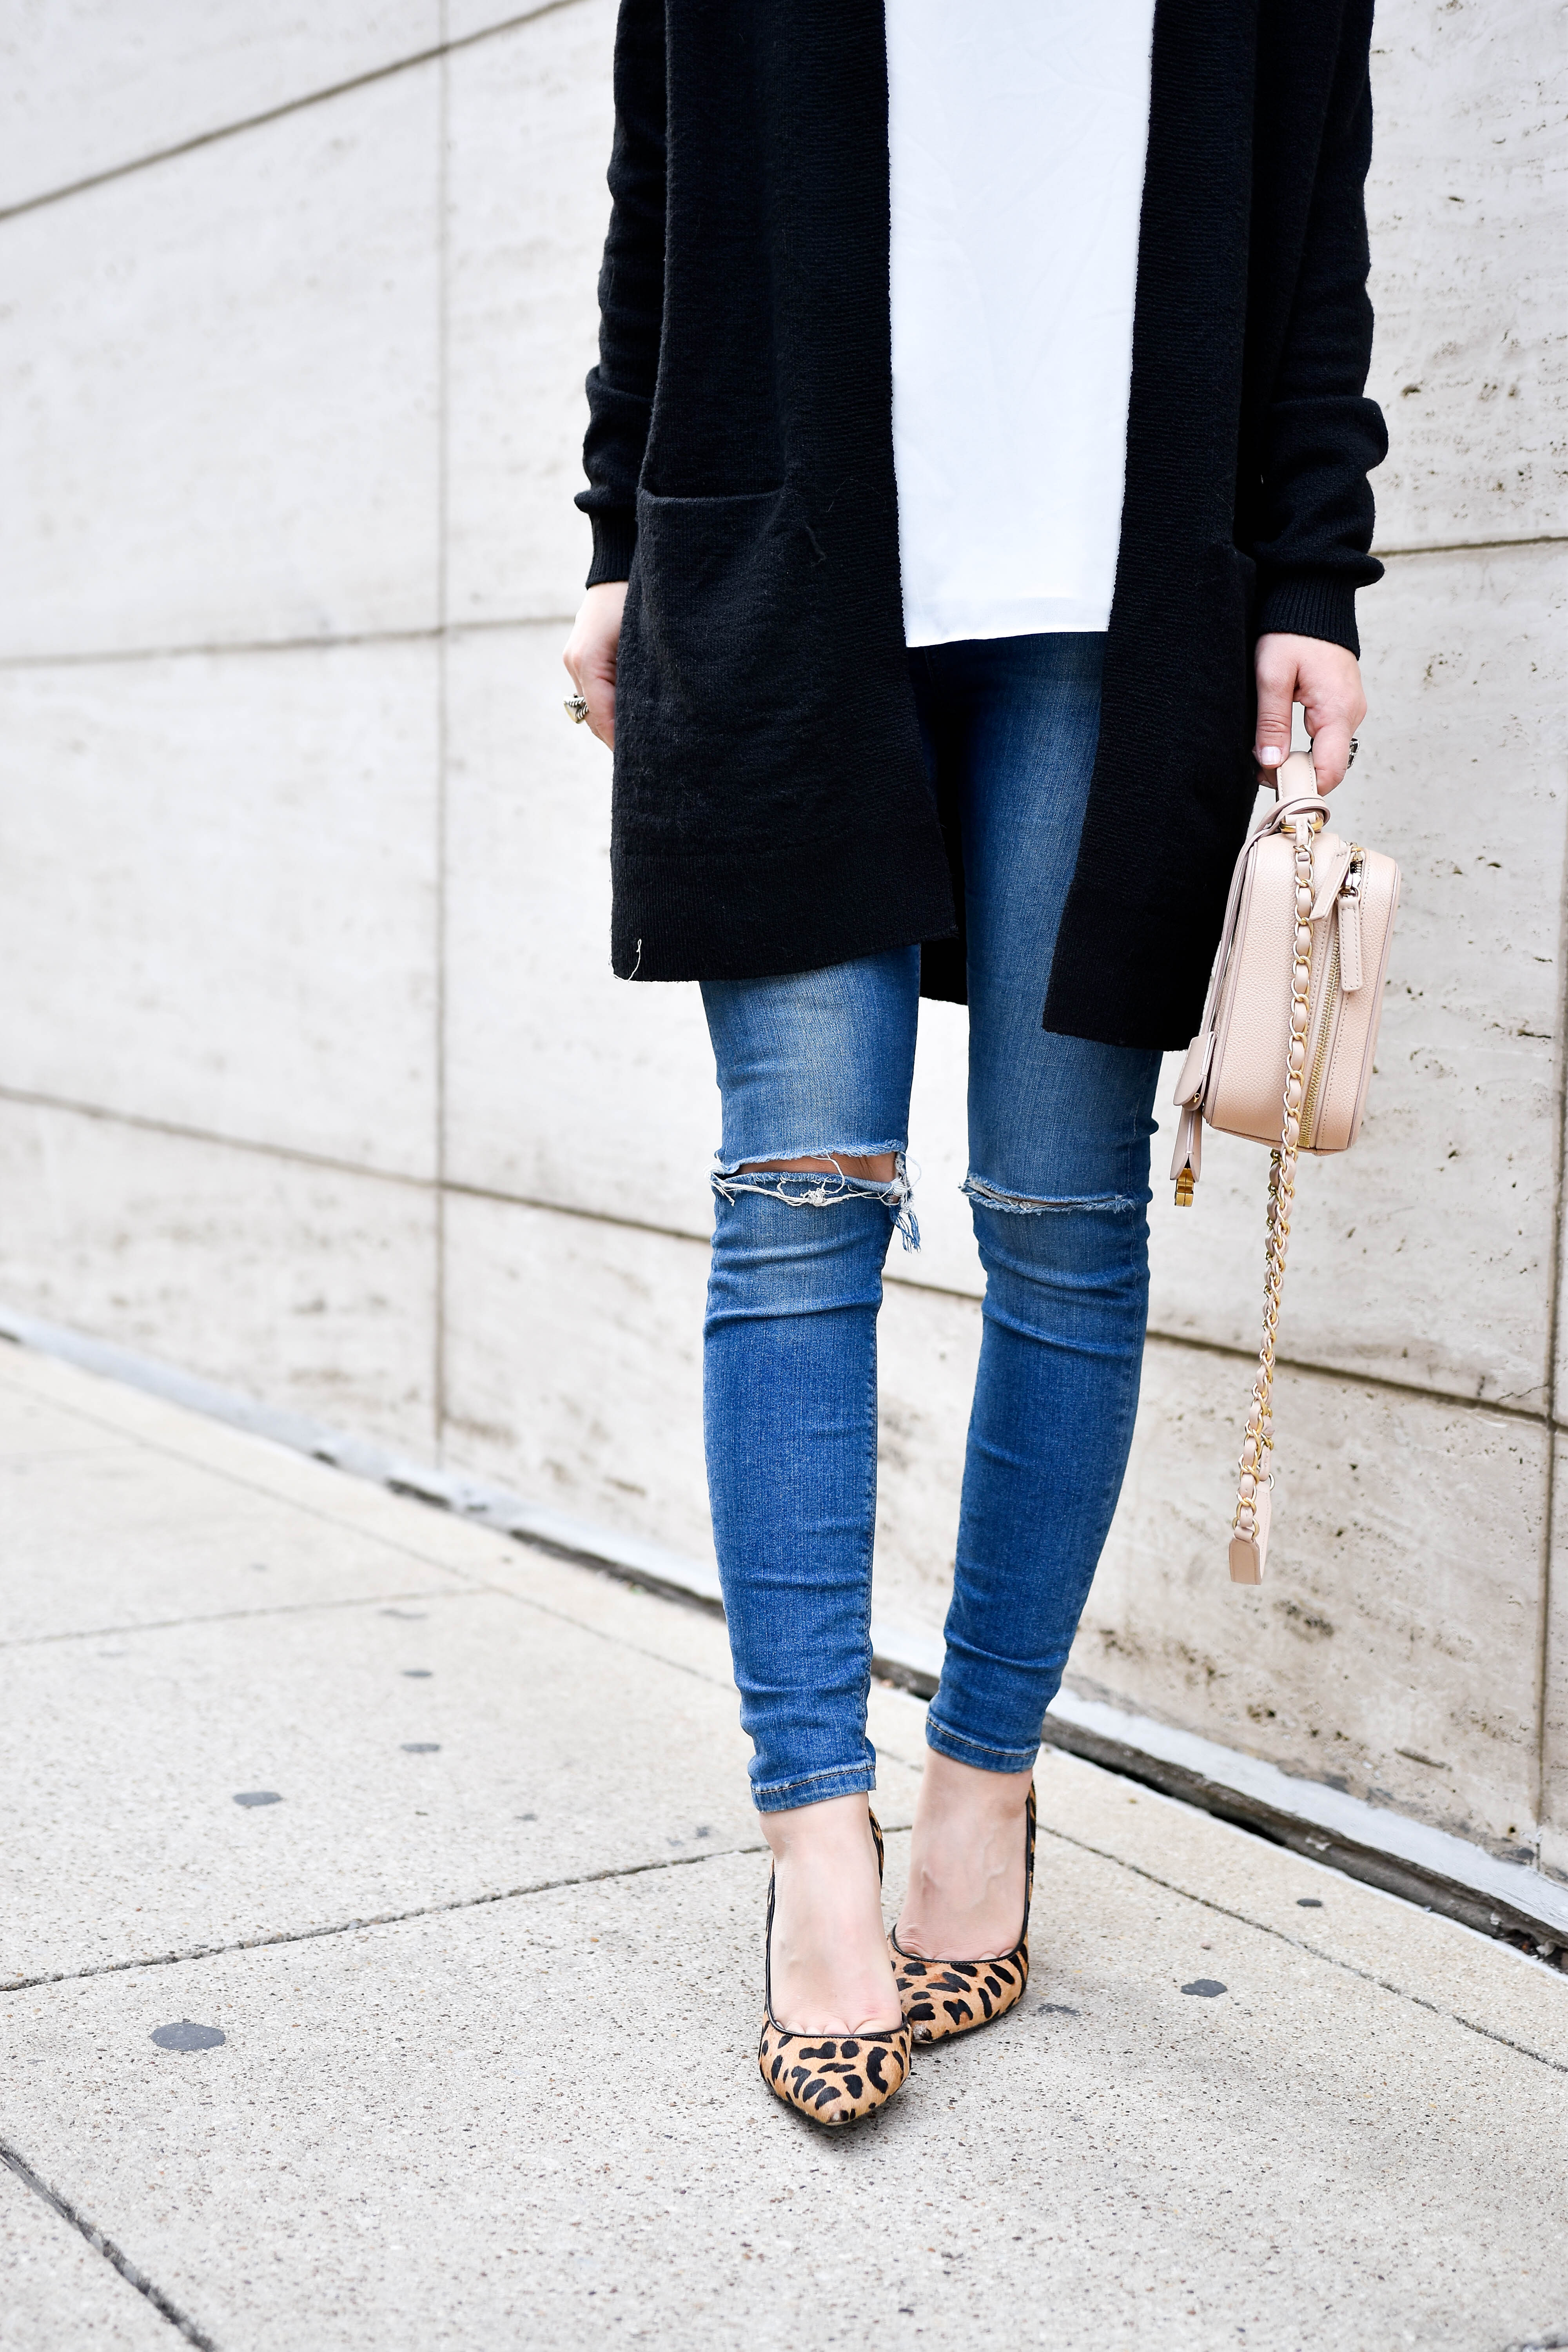 topshop-jeans-and-leopard-heels